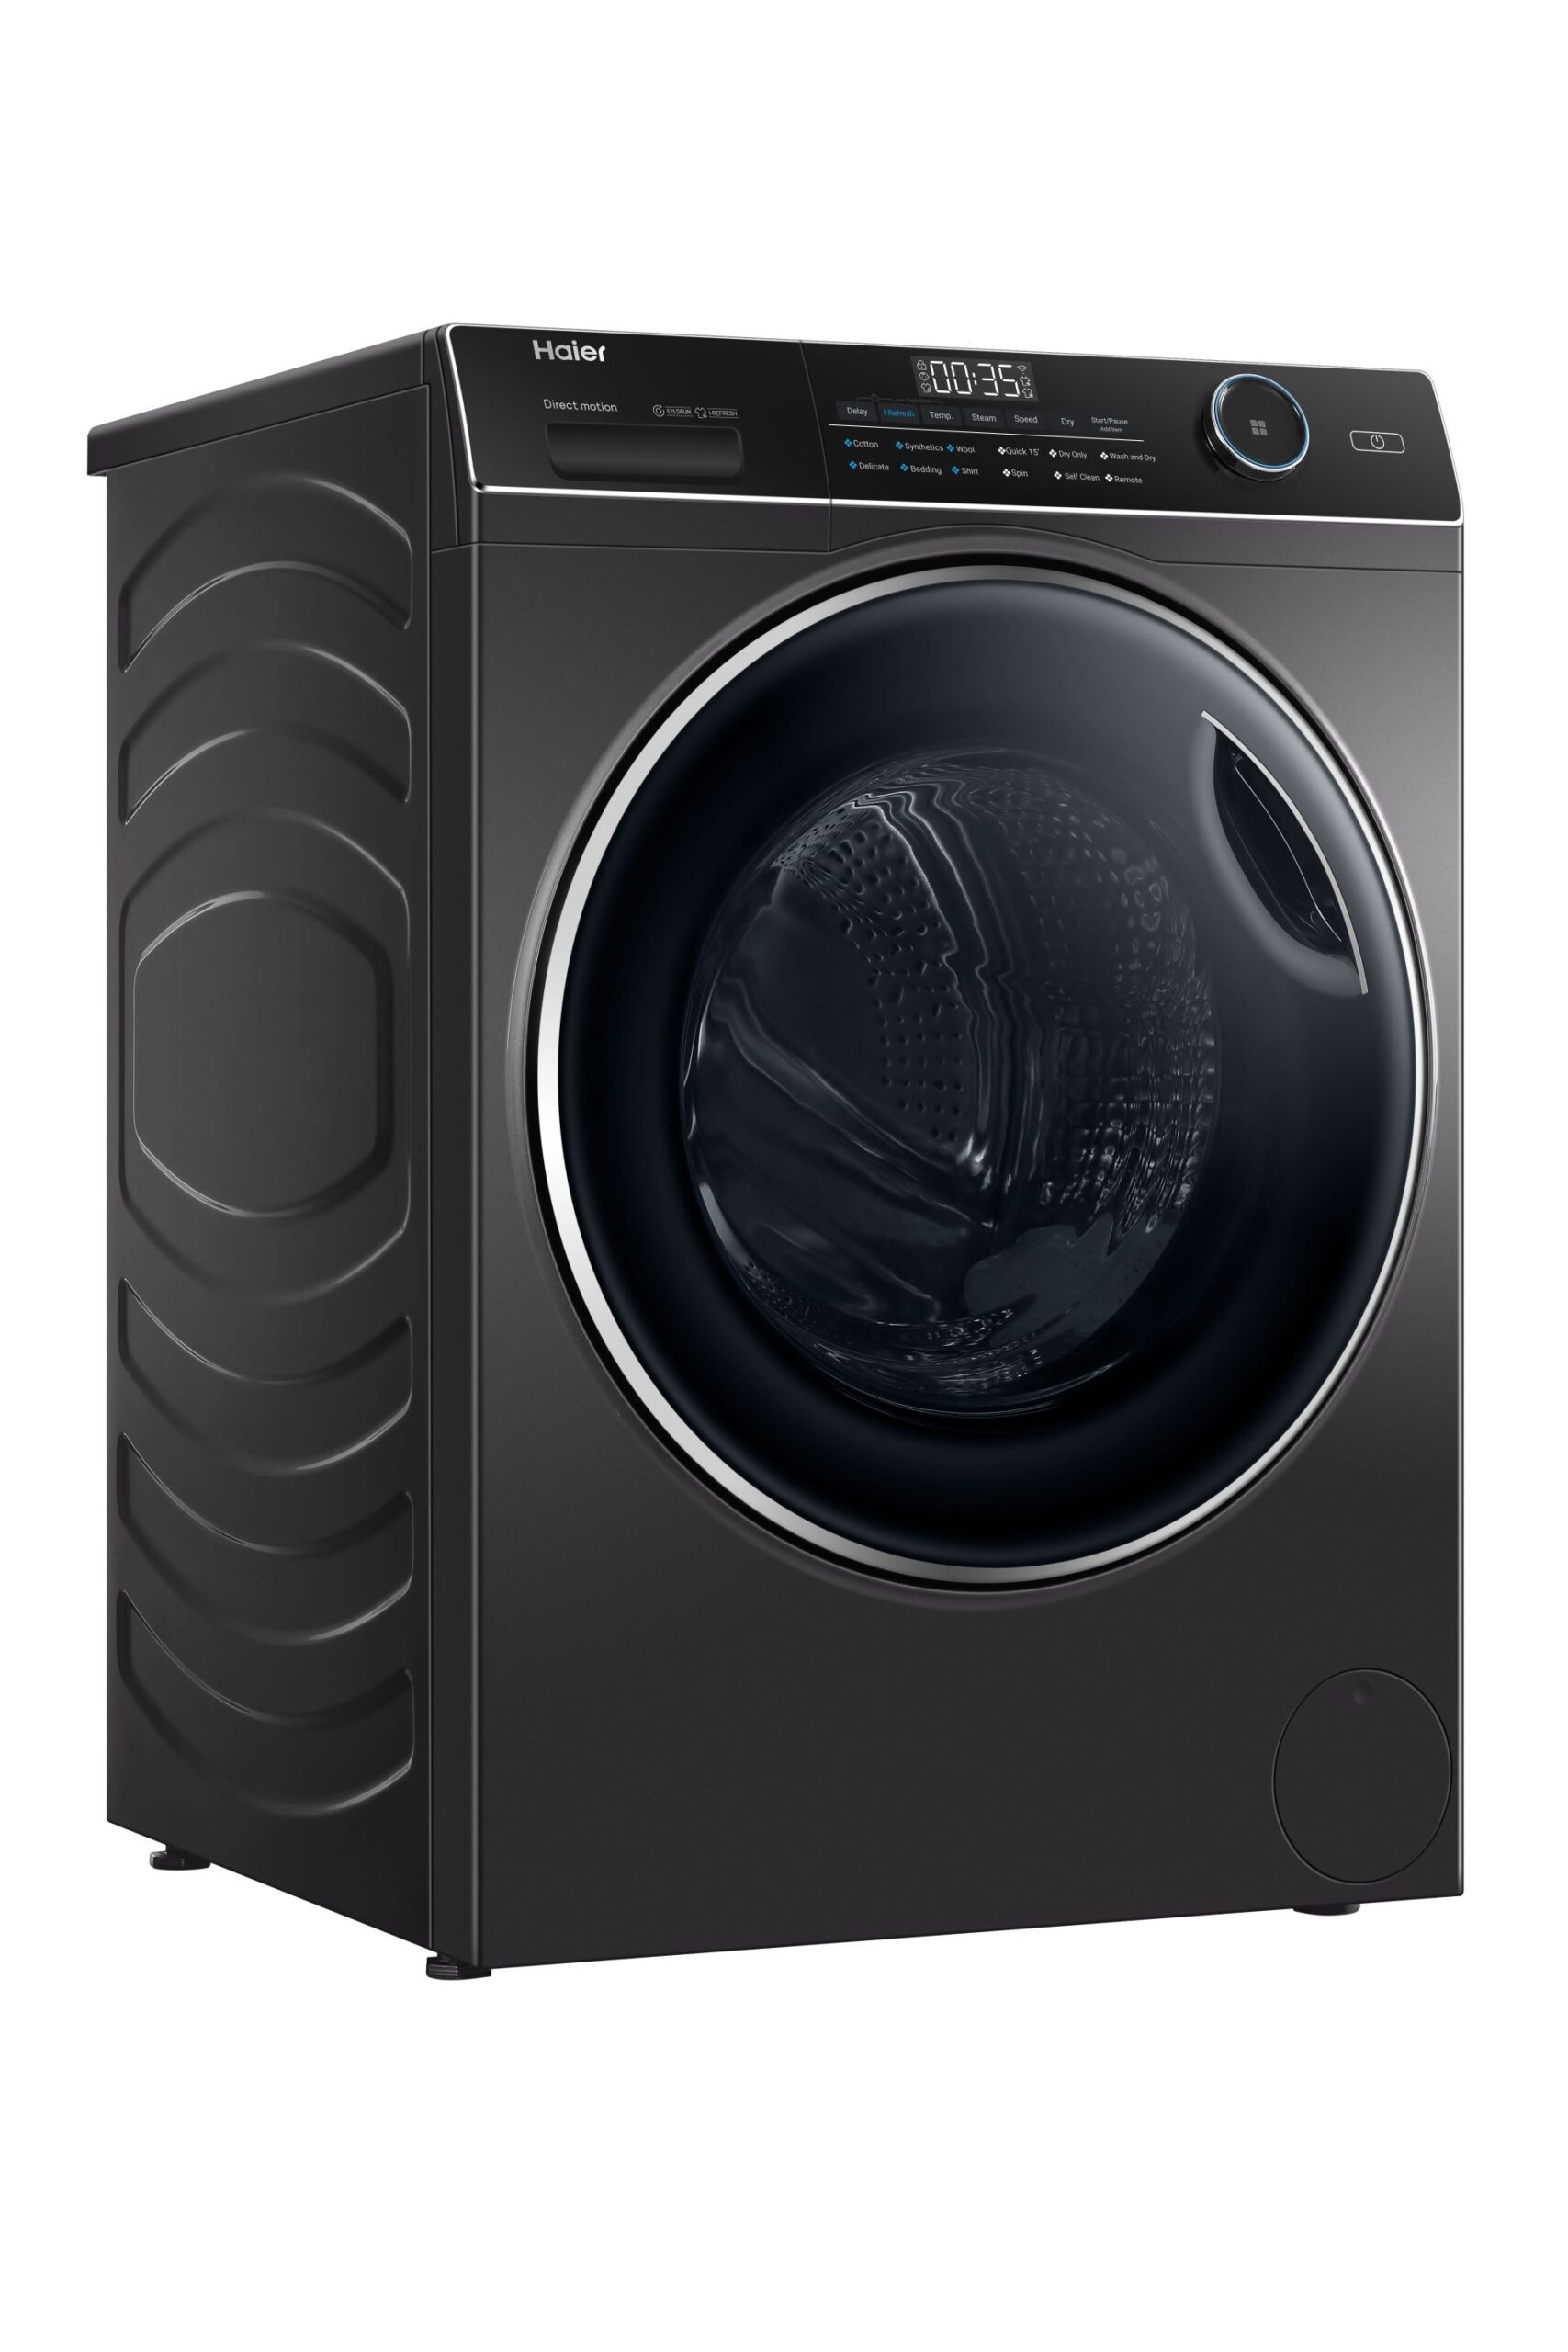 Haier India Launches Washer & Dryer 'Combi' Series for Ultimate Laundry Convenience